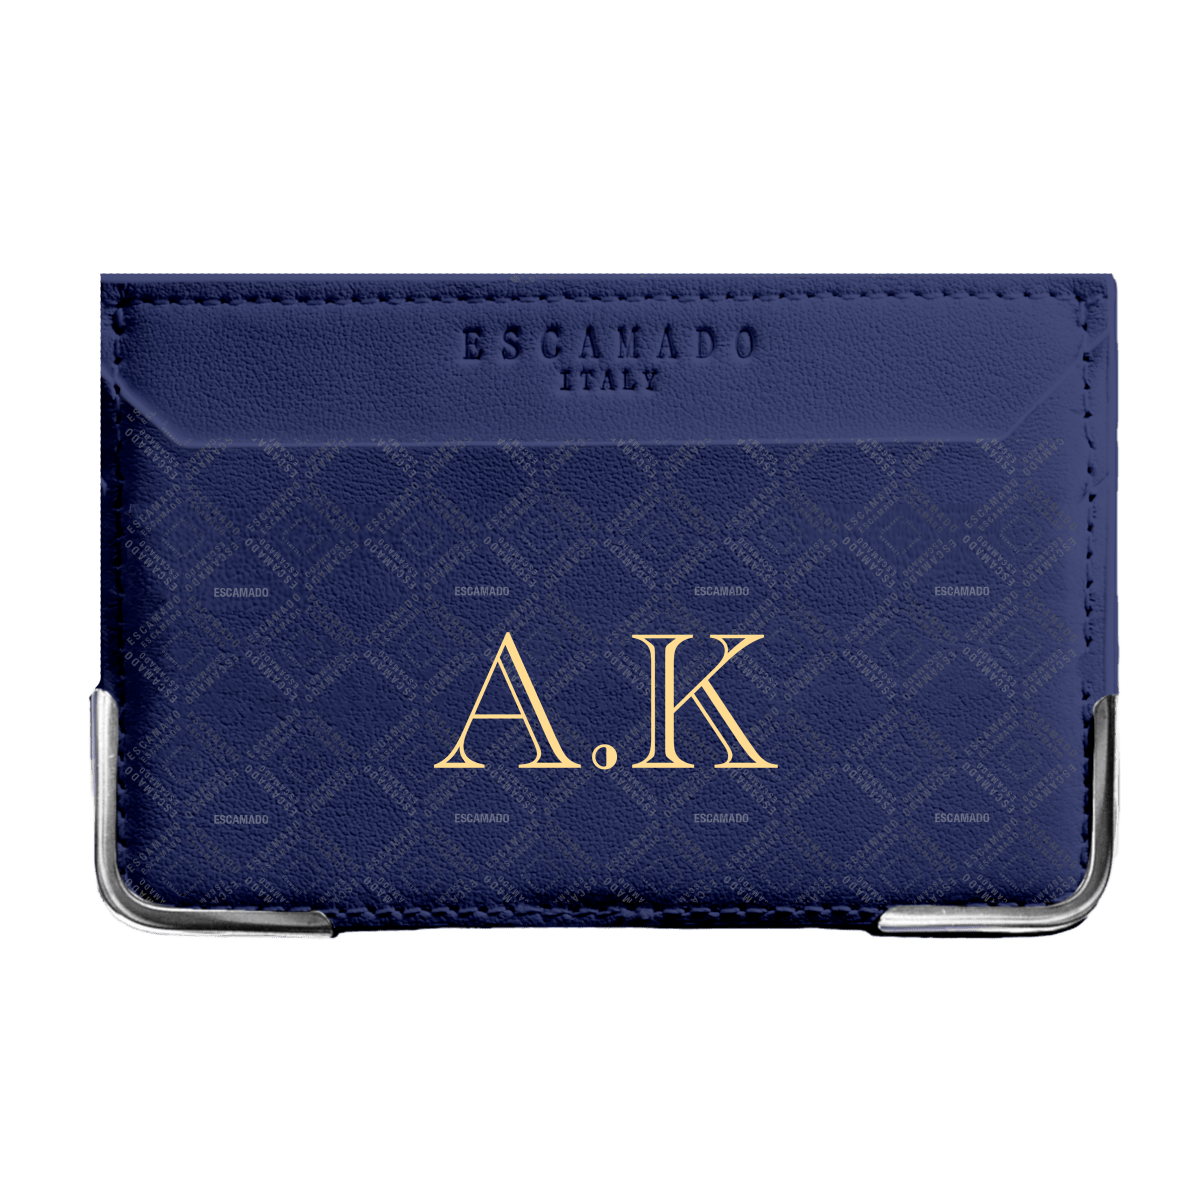 Name Initials Leather Card Holder